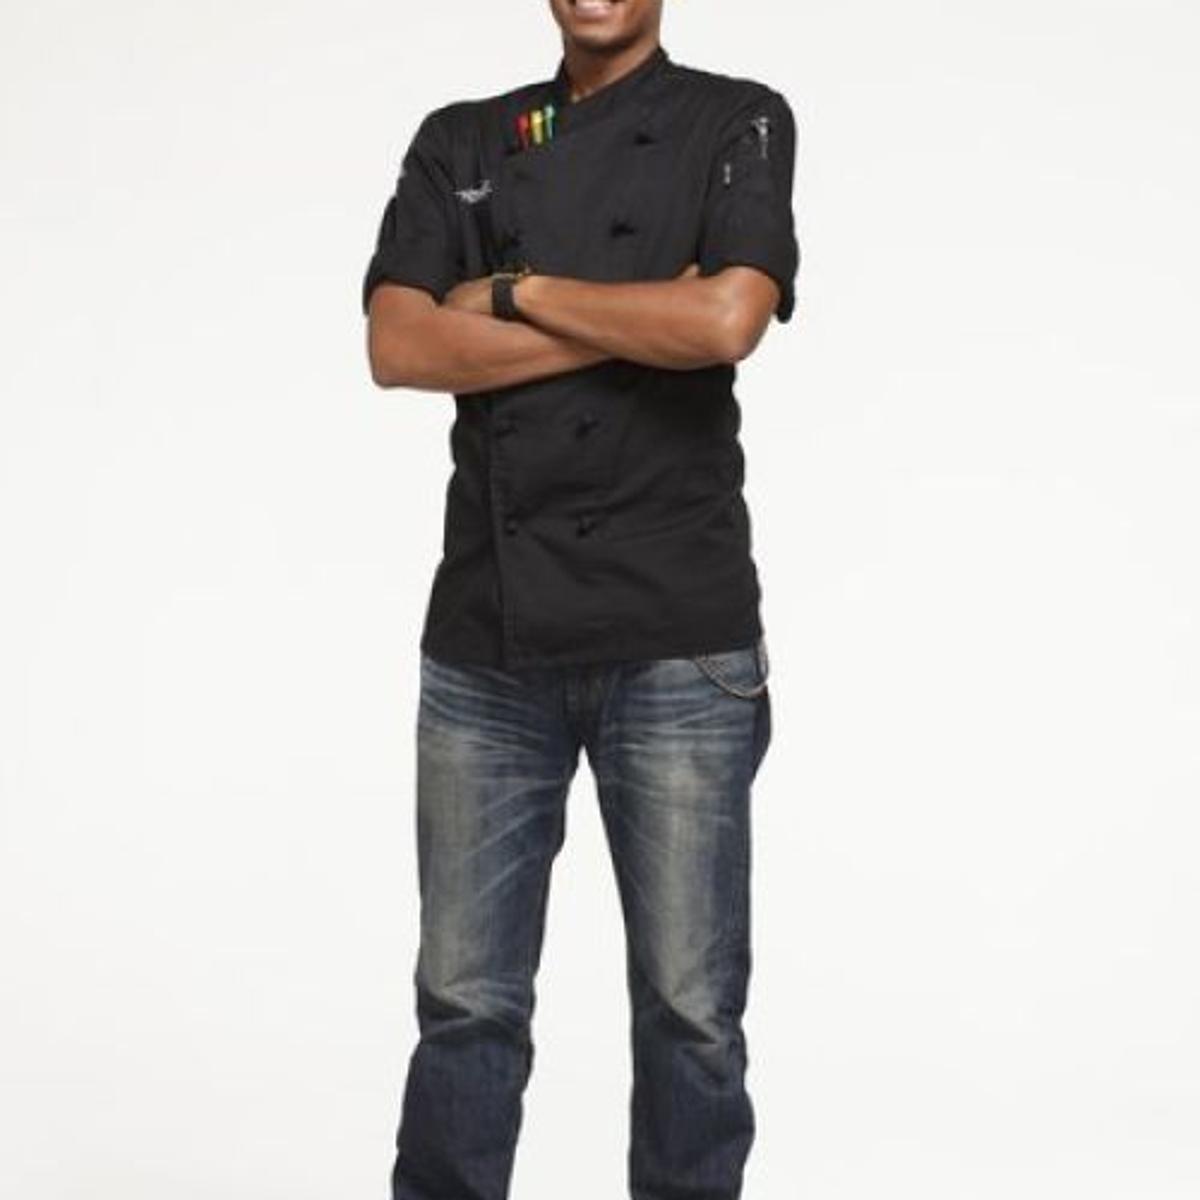 What happened to chef roble